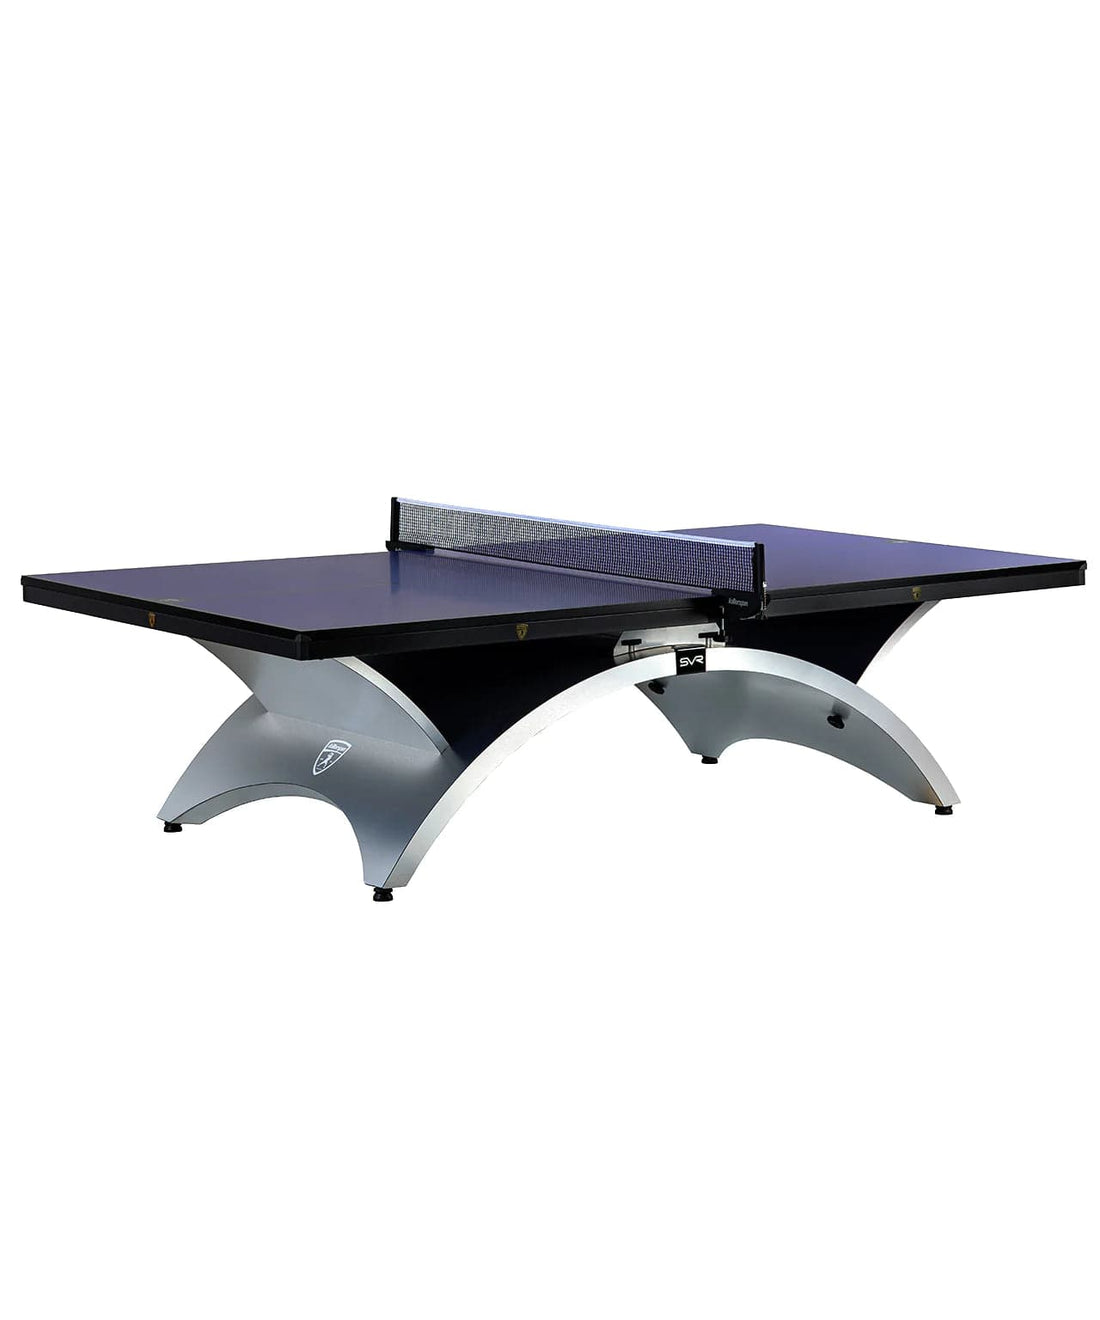 Killerspin Revolution Classic SVR Indoor Ping Pong Table - Silver1 - Atomic Game Store